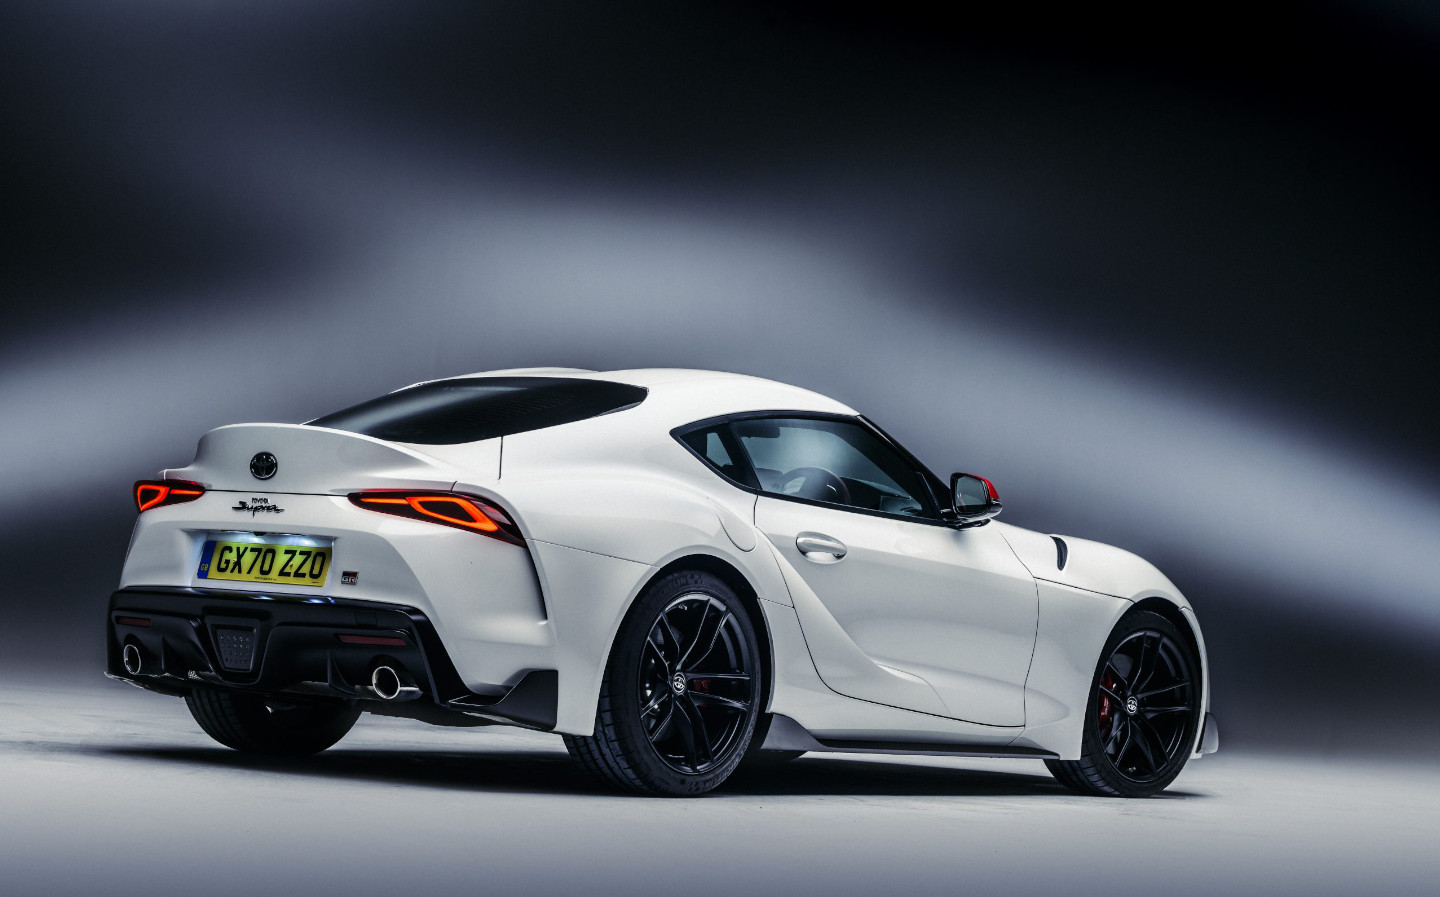 I can't think of any reason to buy the new Toyota GR Supra, says Richard Porter